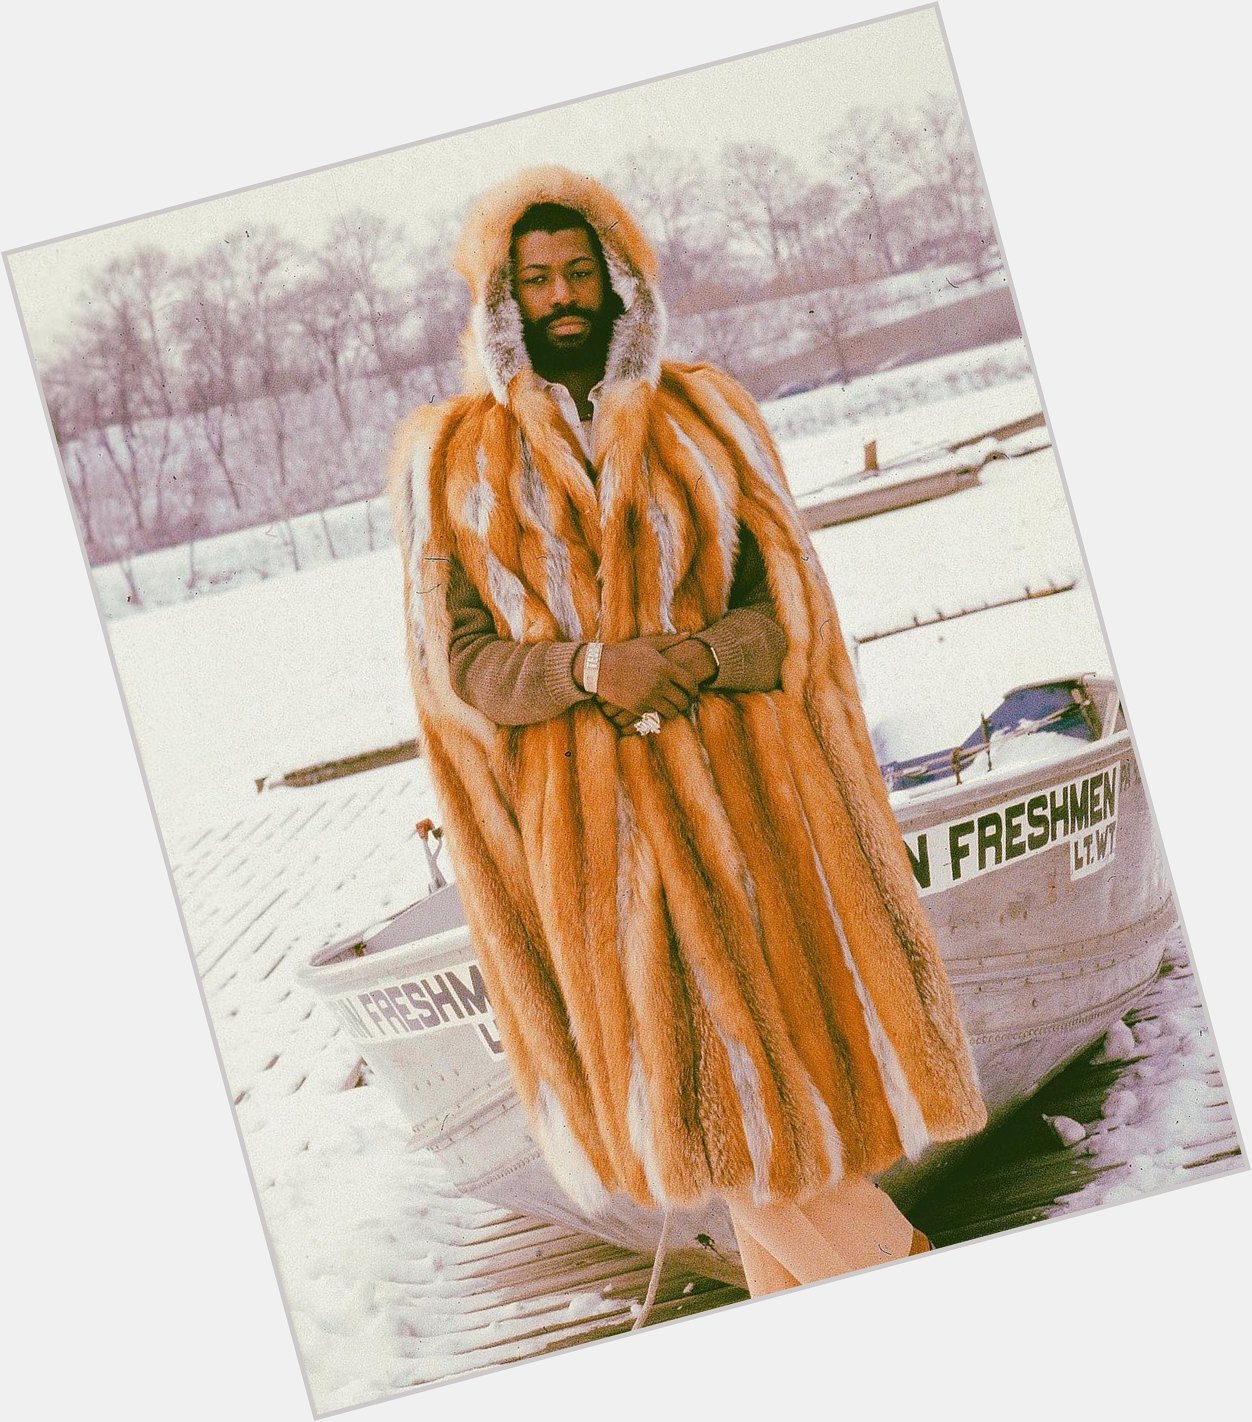 Happy Heavenly 72nd Birthday to one of the greatest singers of all time, The Legendary Teddy Pendergrass 